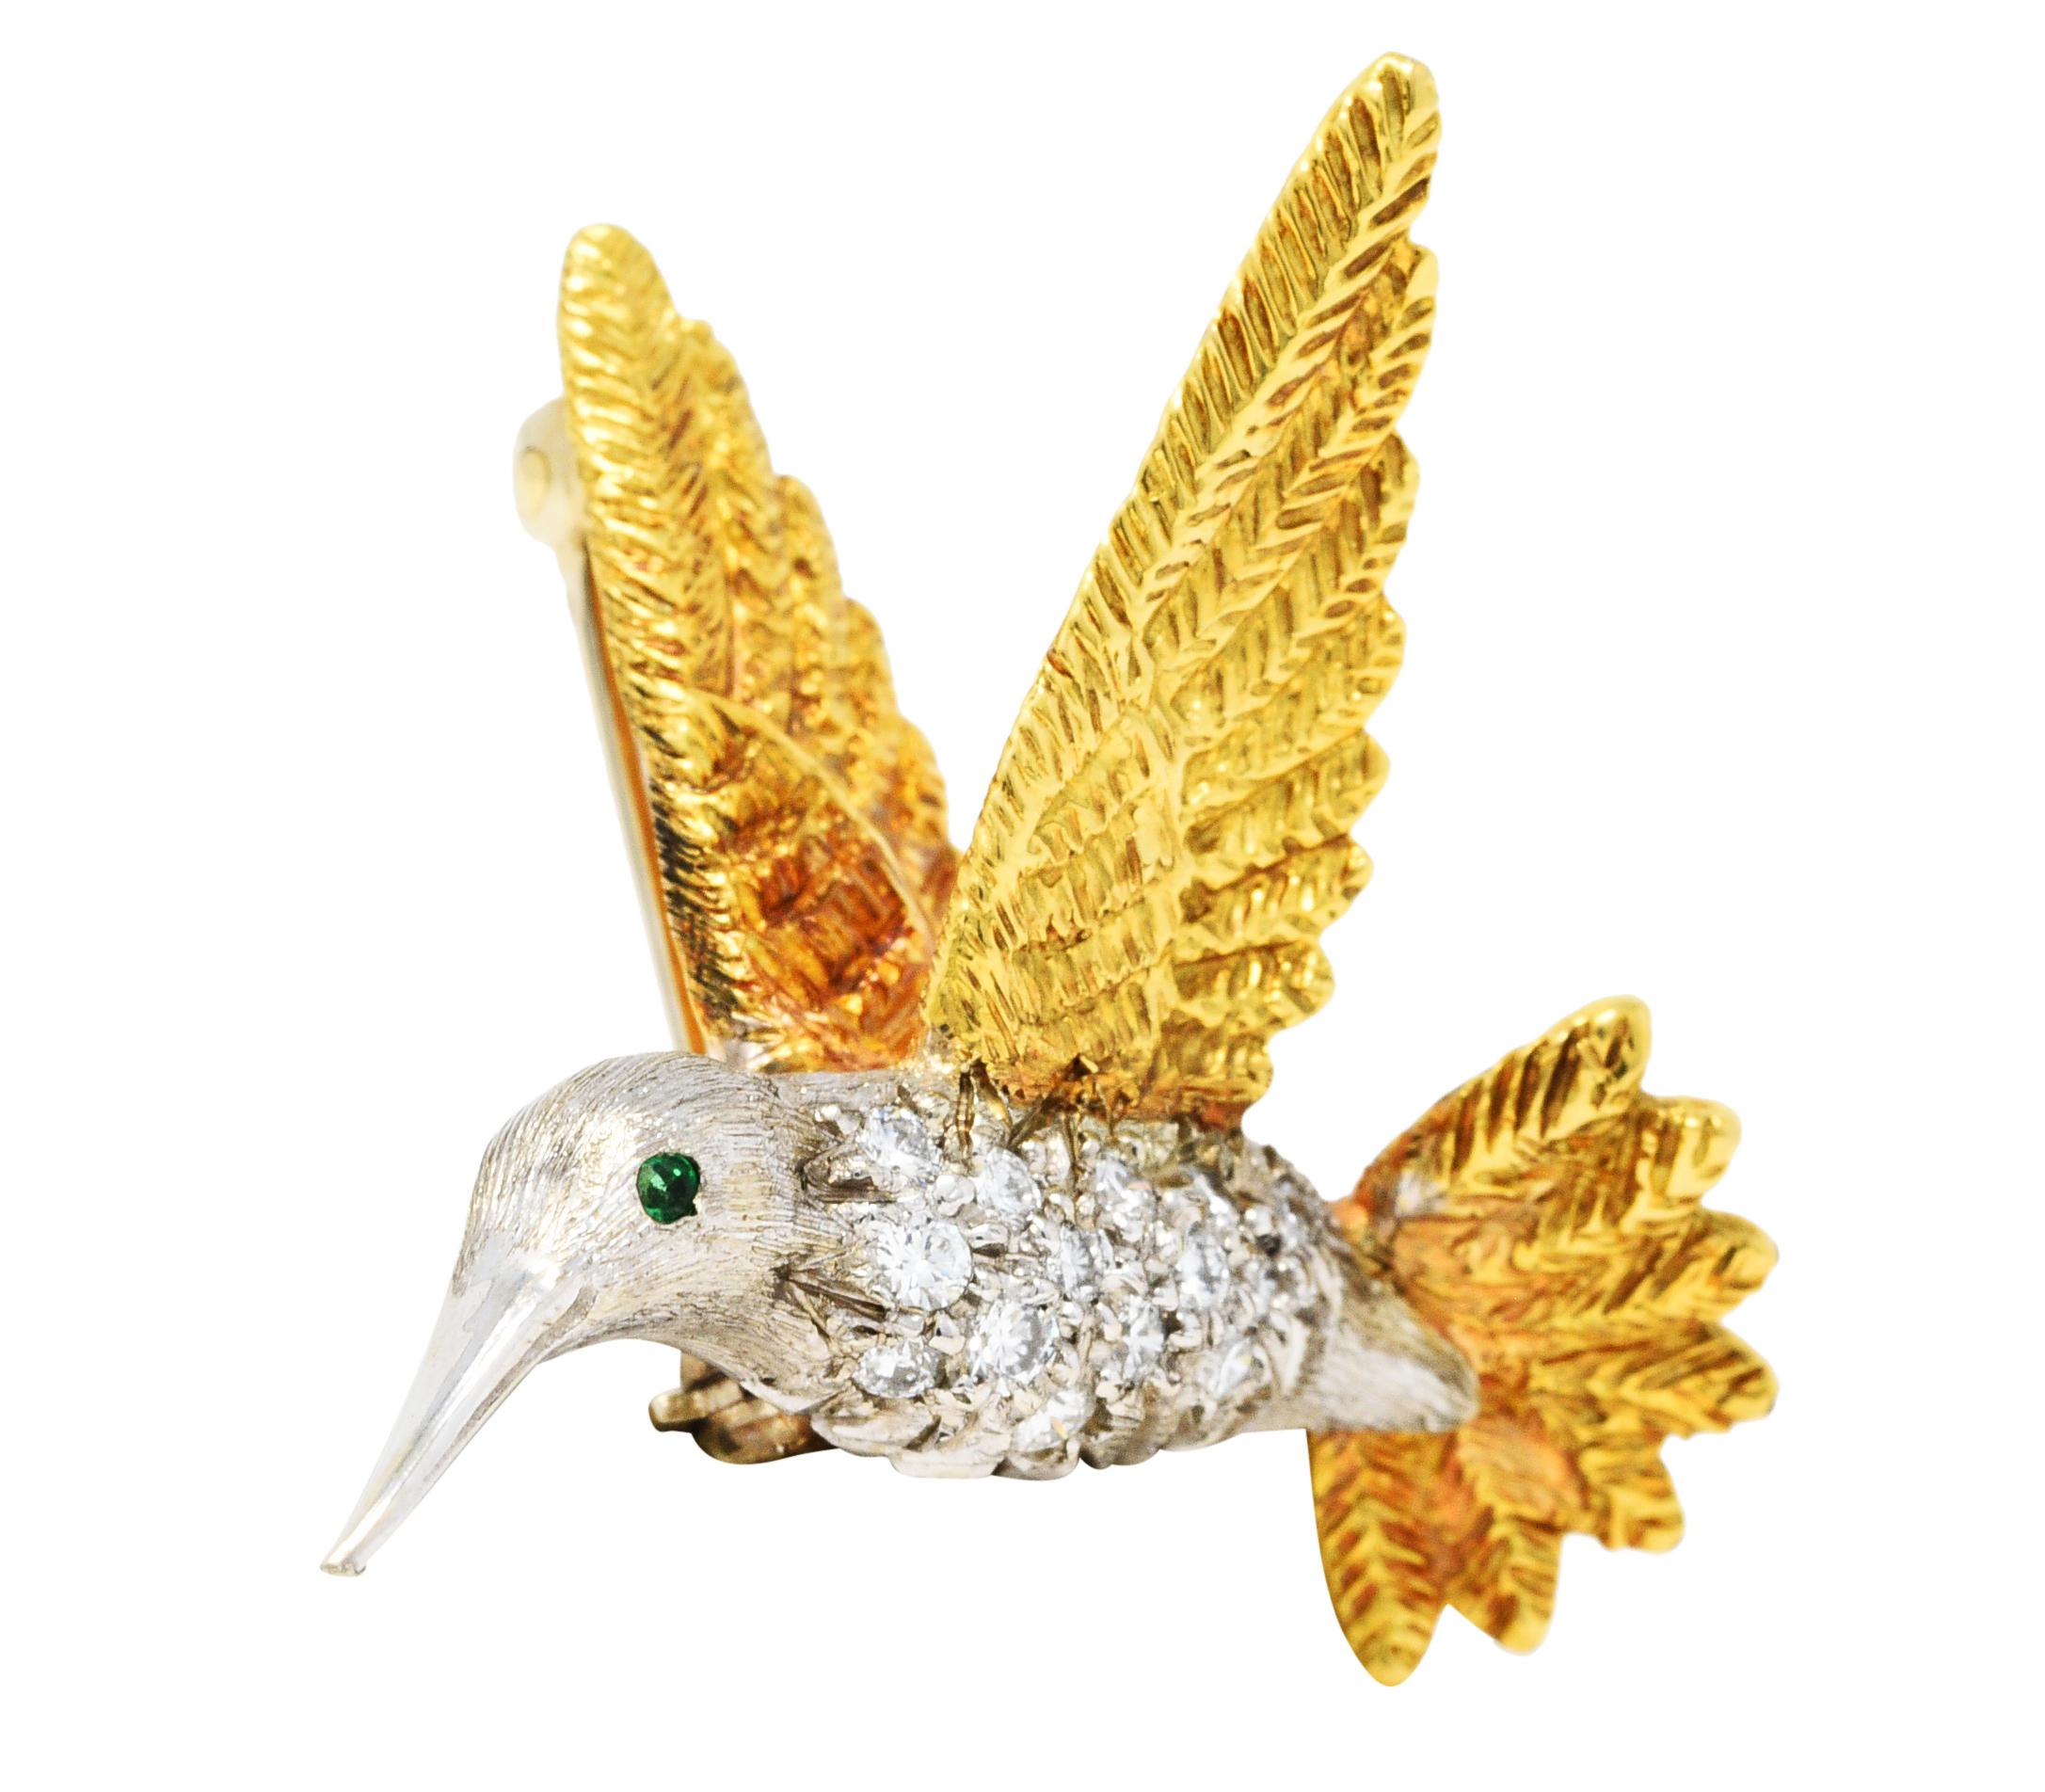 Brooch is designed as a hummingbird in mid-flight

With highly texturous yellow gold feathers and a white gold body

Pavè set with round brilliant cut diamonds weighing in total approximately 0.35 carat - eye clean and bright

With a round cut